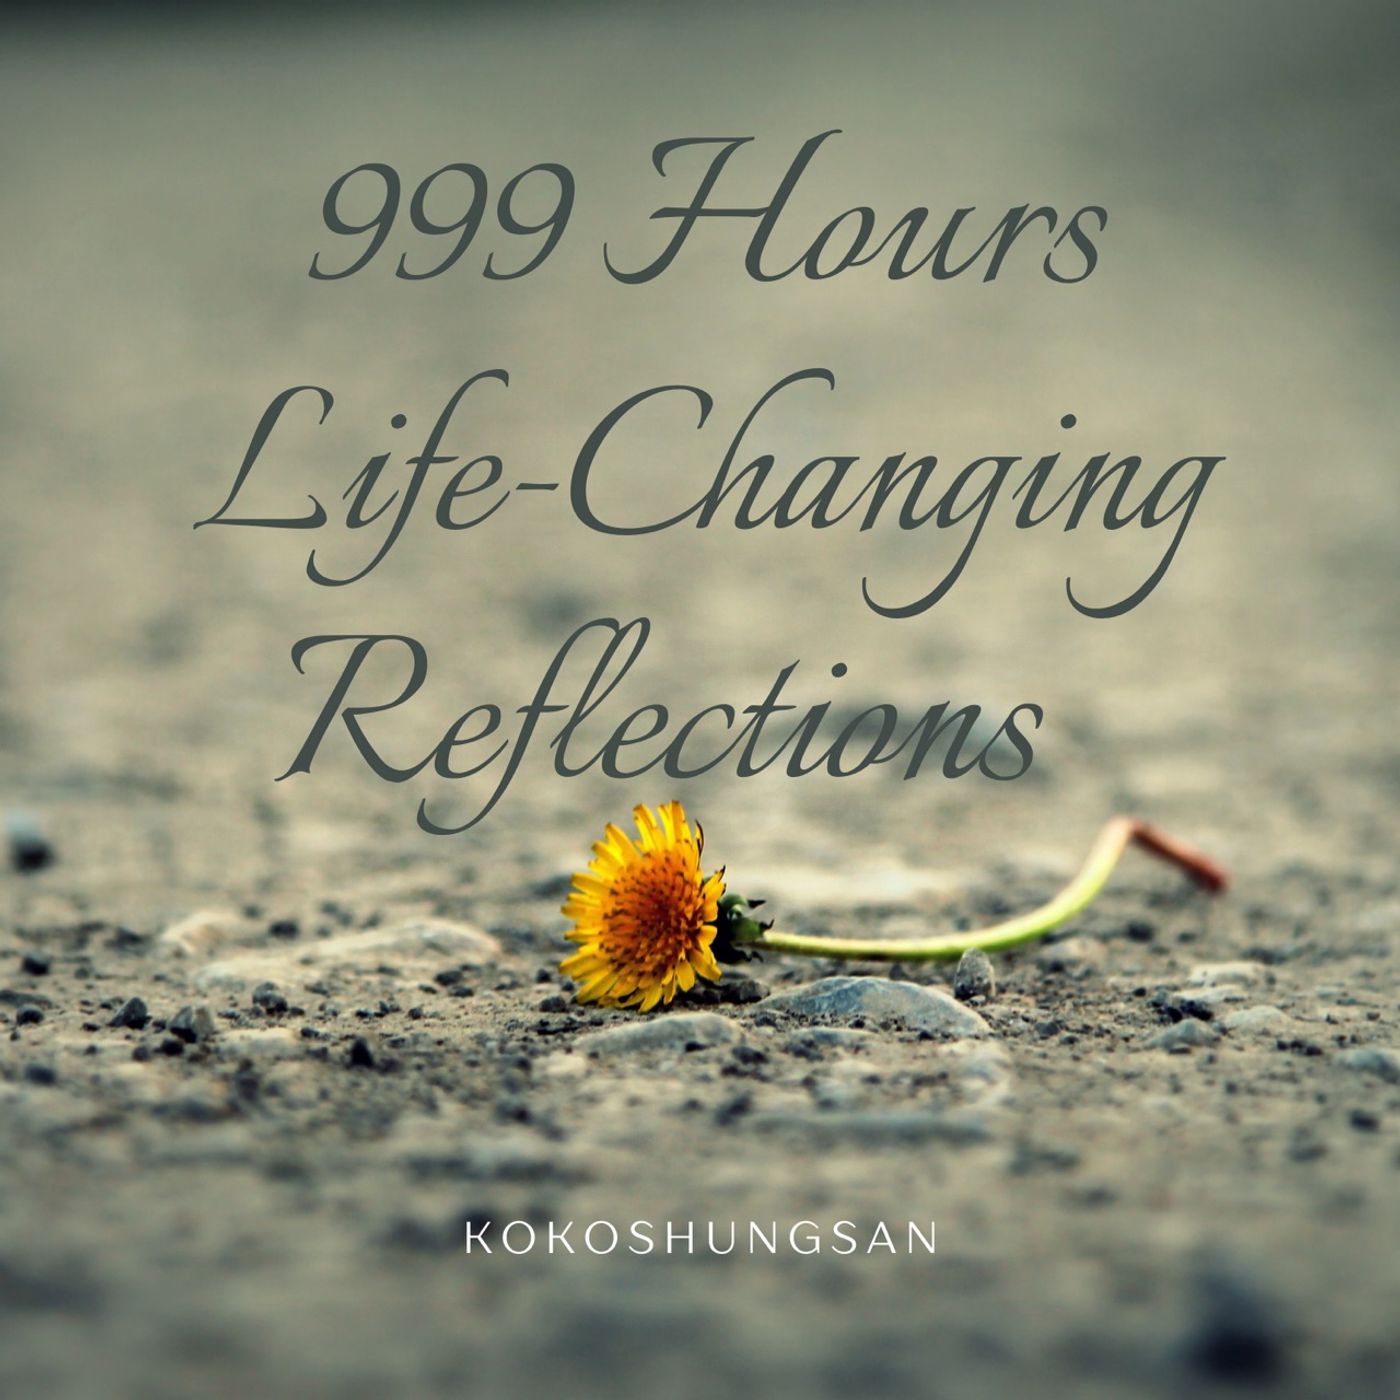 999 Hours Life-Changing Reflections